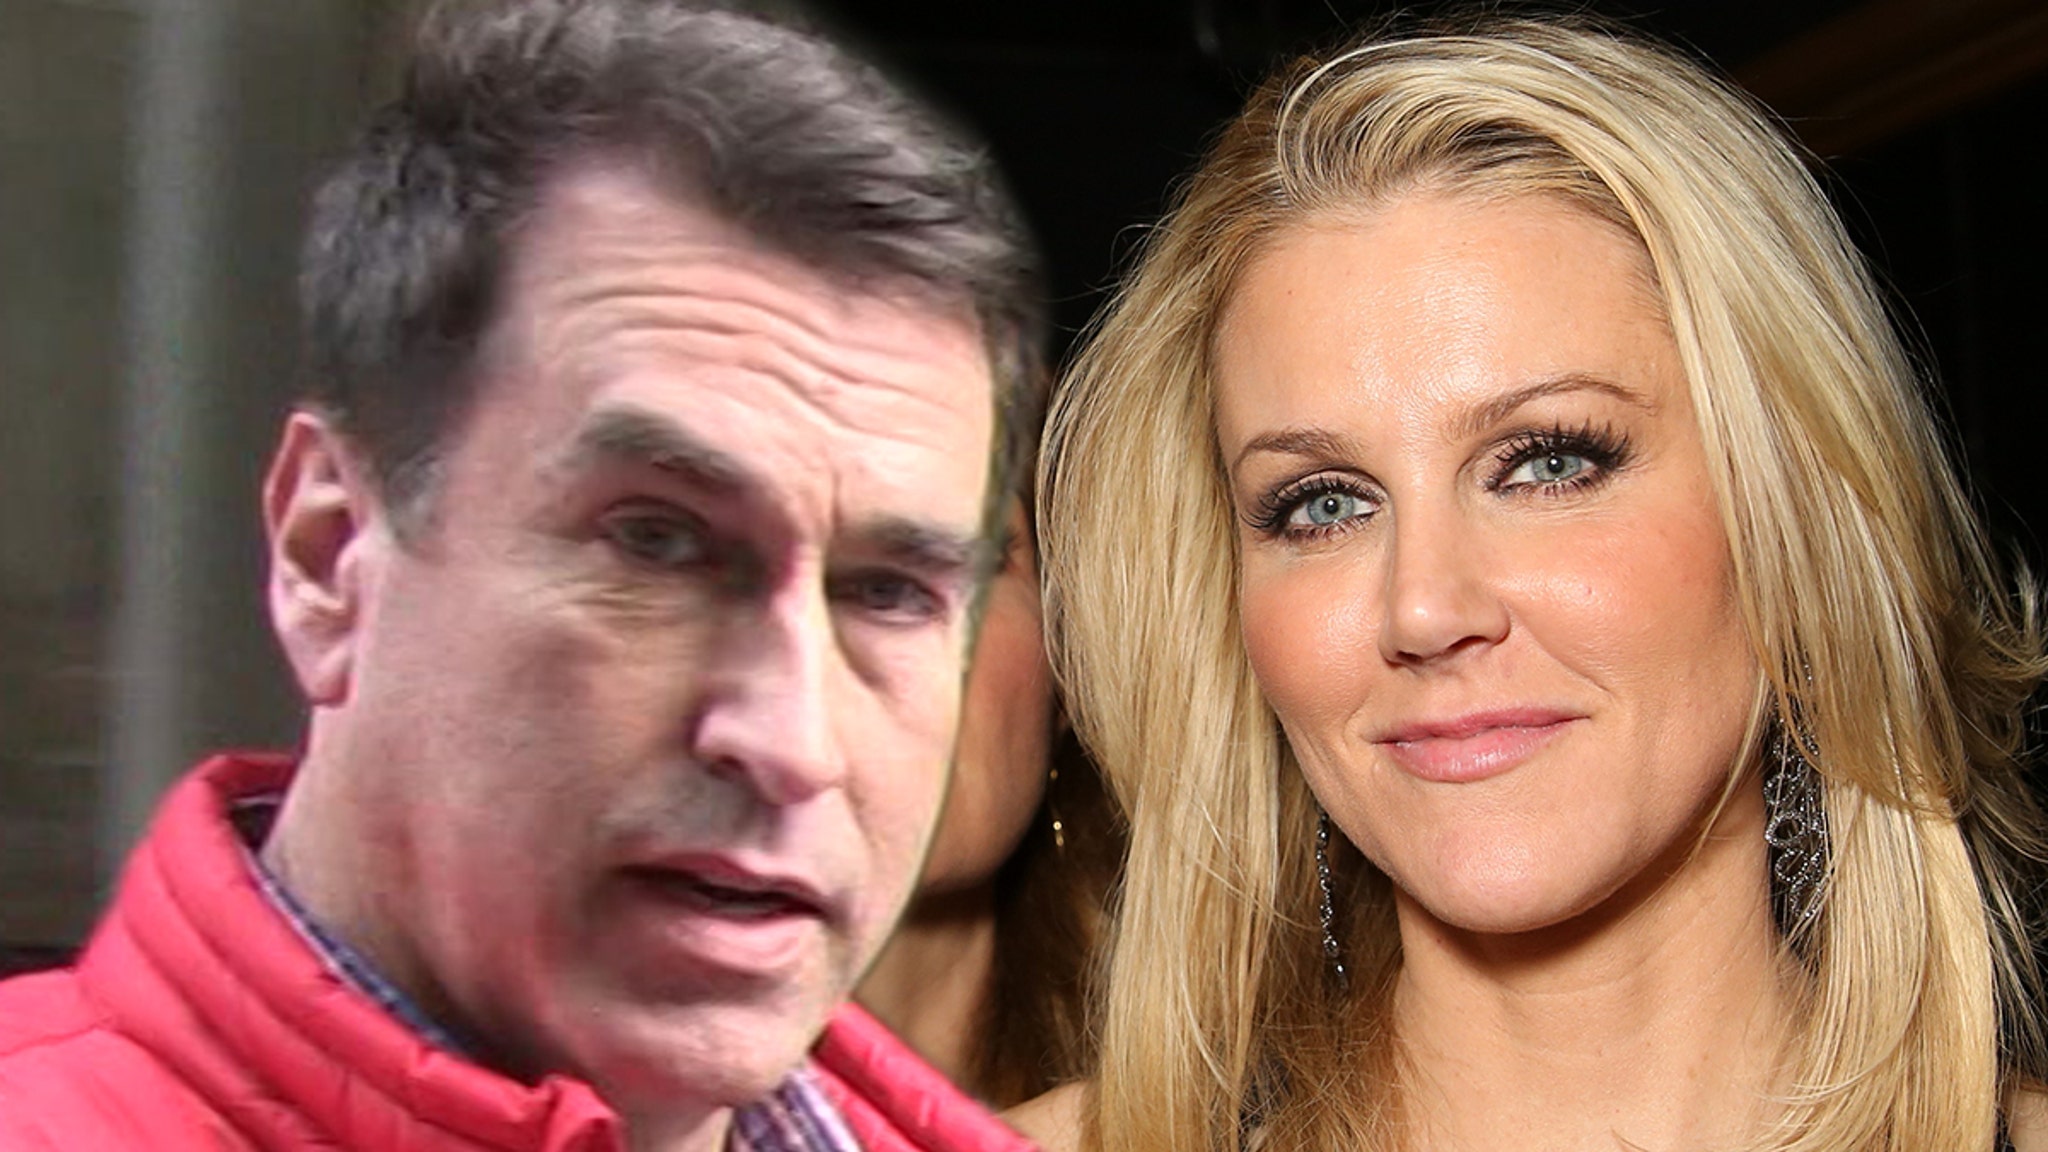 Rob Riggle Claims Estranged Wife Spied on Him at Home with Hidden Camera pic picture